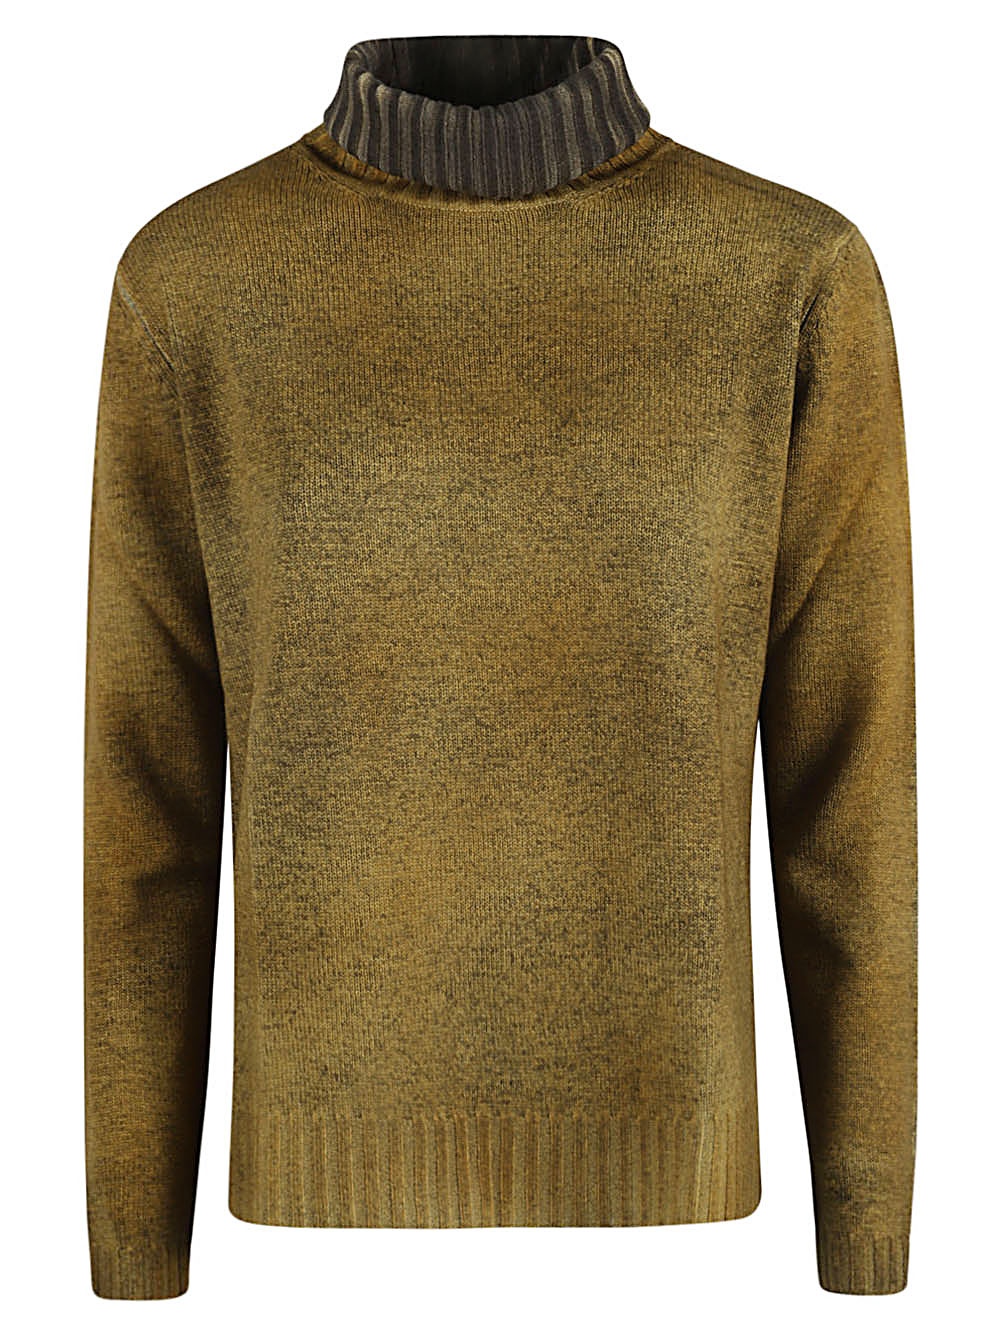 Alessandro Aste ALESSANDRO ASTE- Wool And Cashmere Blend Turtleneck Sweater